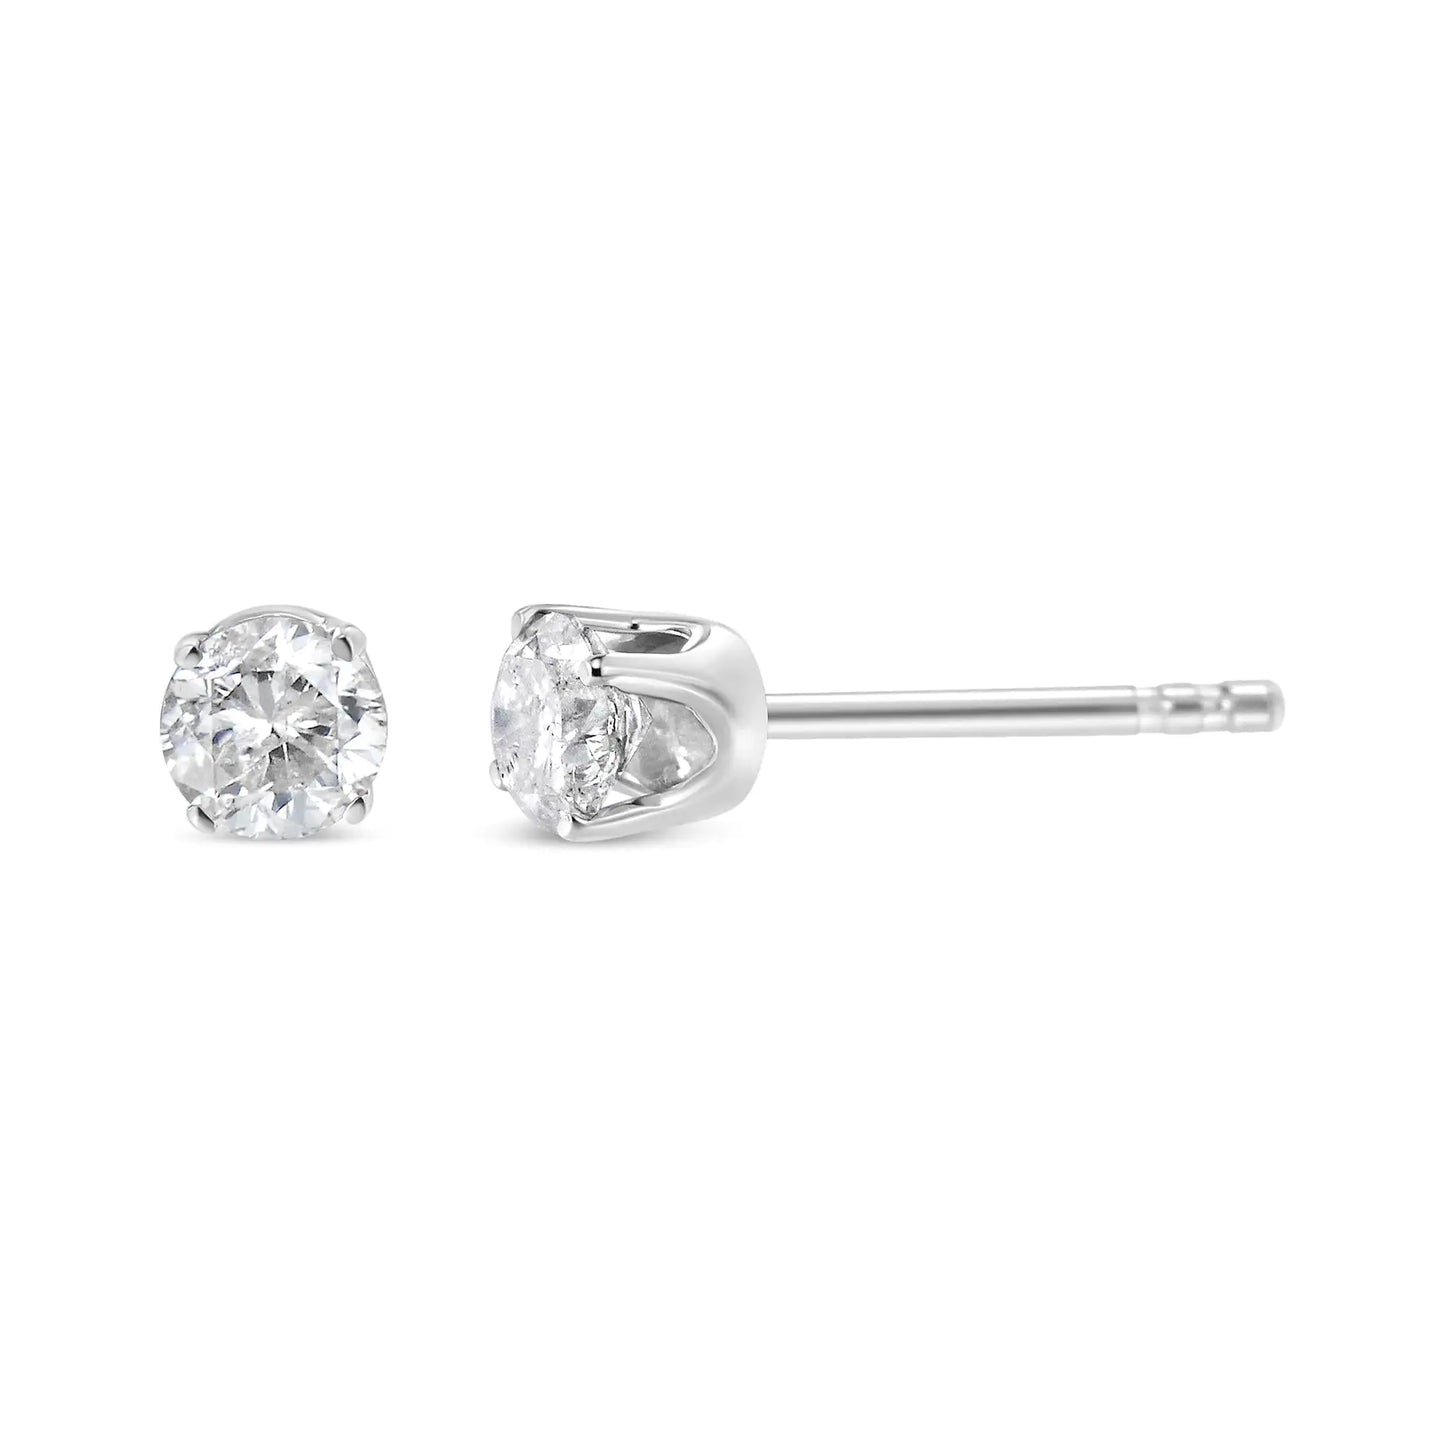 14K White Gold 1/6 Cttw Round Brilliant-Cut Near Colorless Diamond Classic 4-Prong Stud Earrings (H-I Color, I1-I2 Clarity)